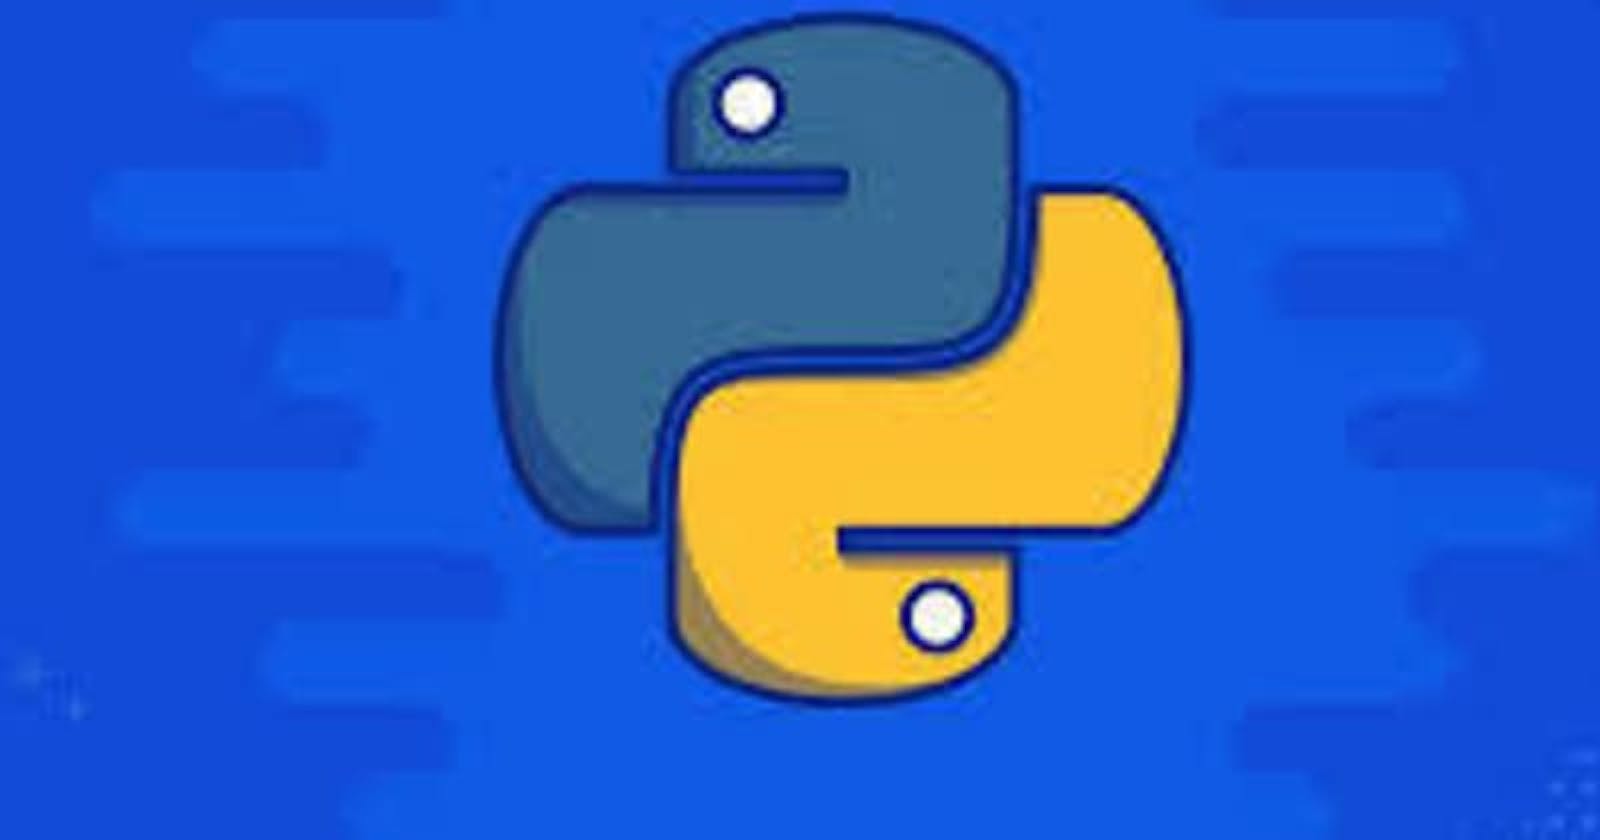 Learning Python #1 - The beginning...